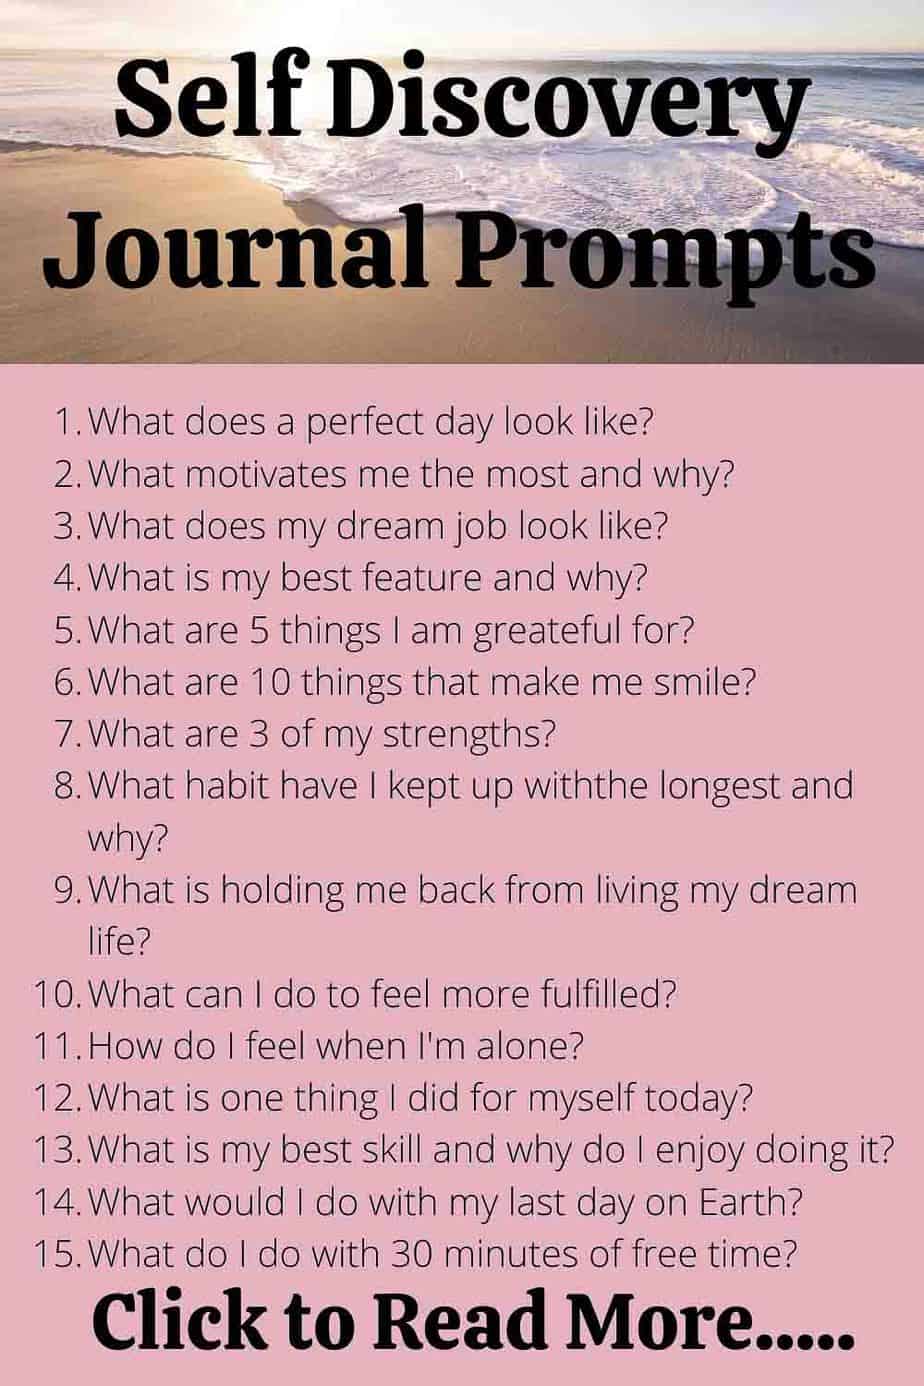 52 Journal Prompts for Self Discovery